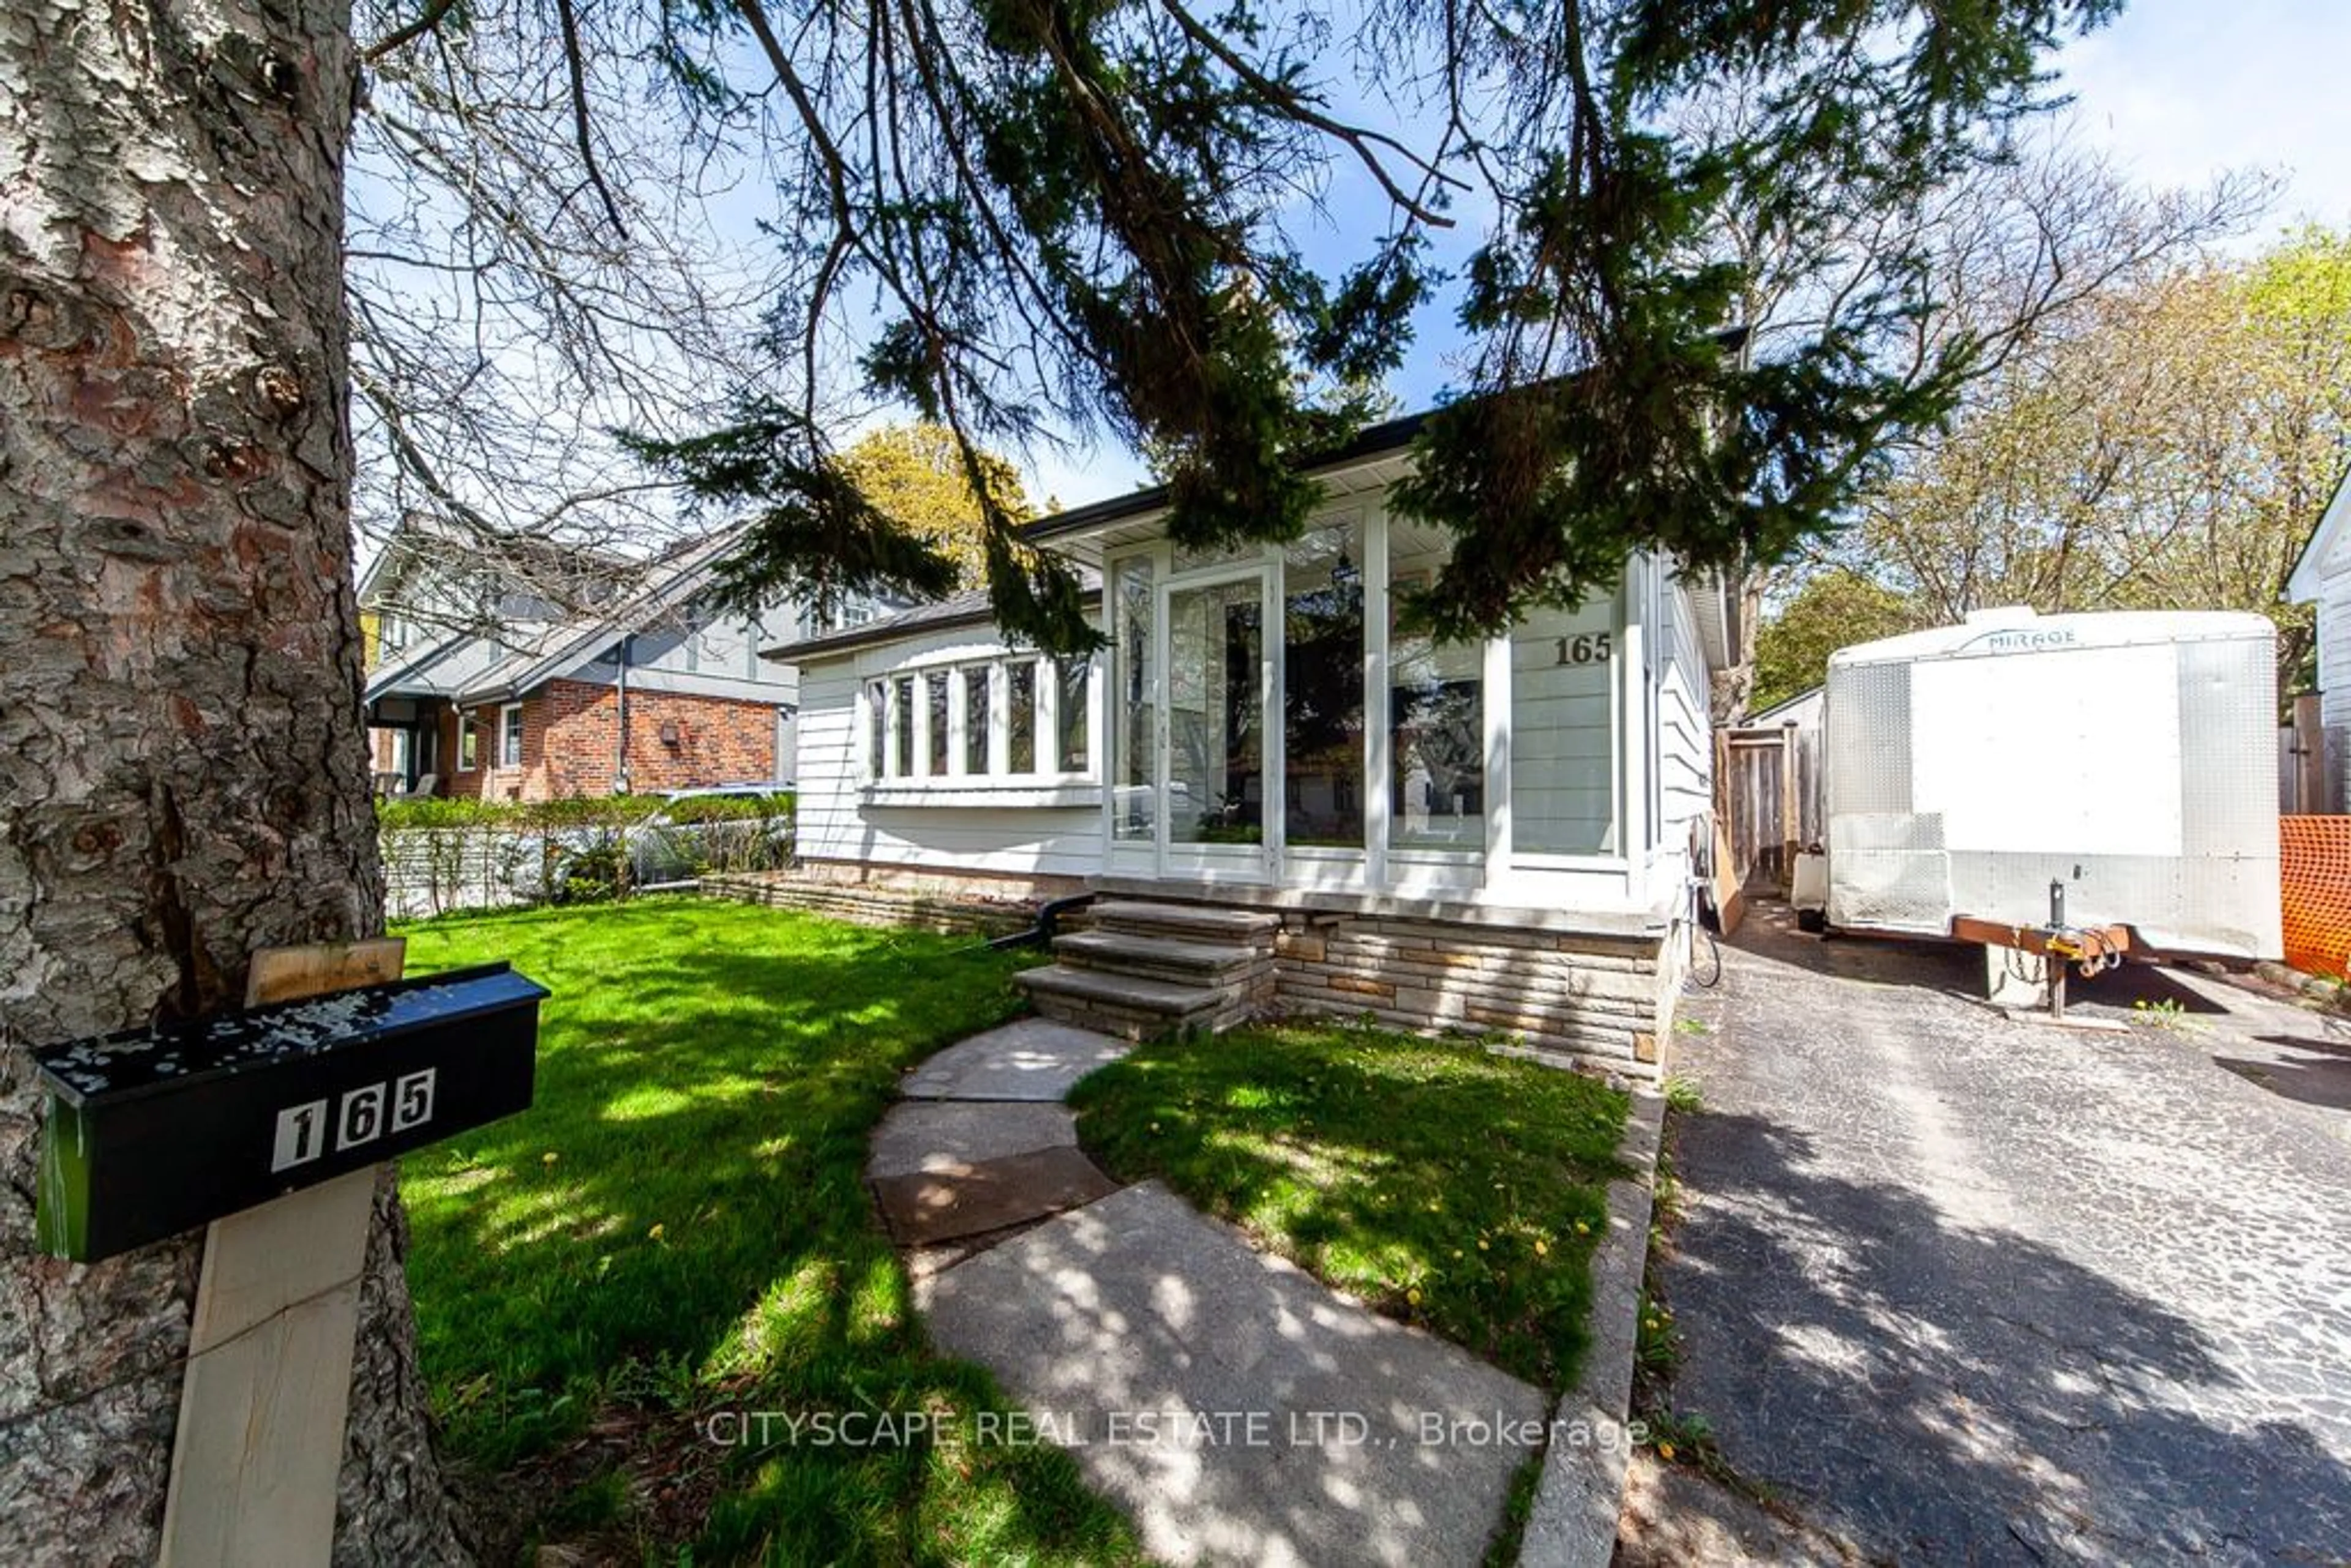 Outside view for 165 Harewood Ave, Toronto Ontario M1M 2S1